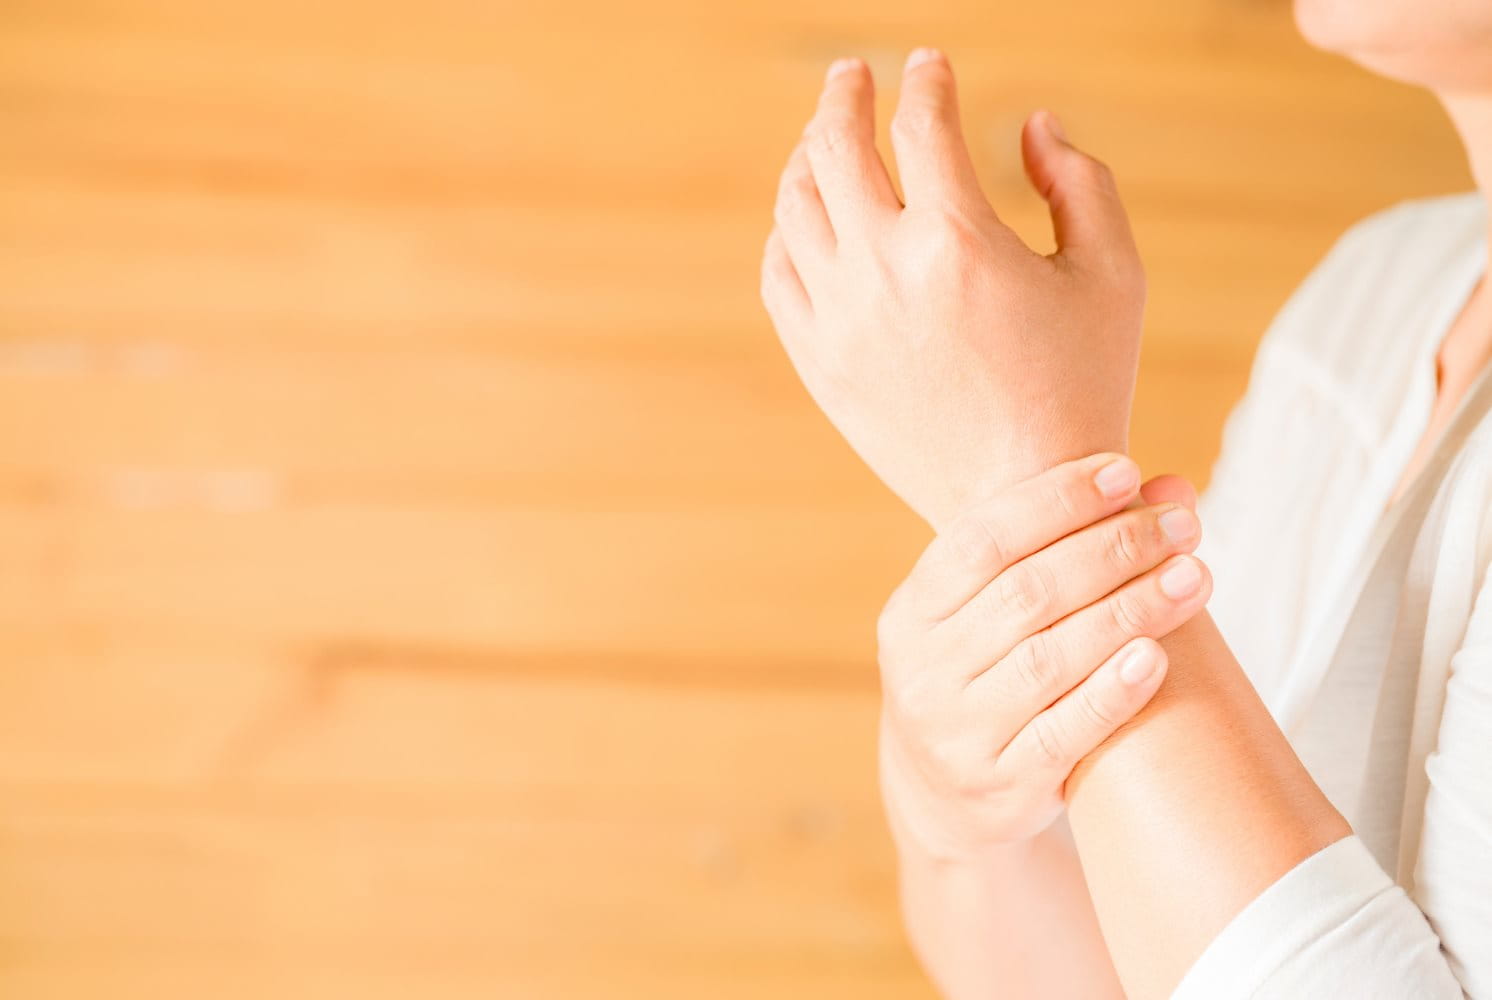 A Quick Guide to Pinpointing Wrist Pain Locations